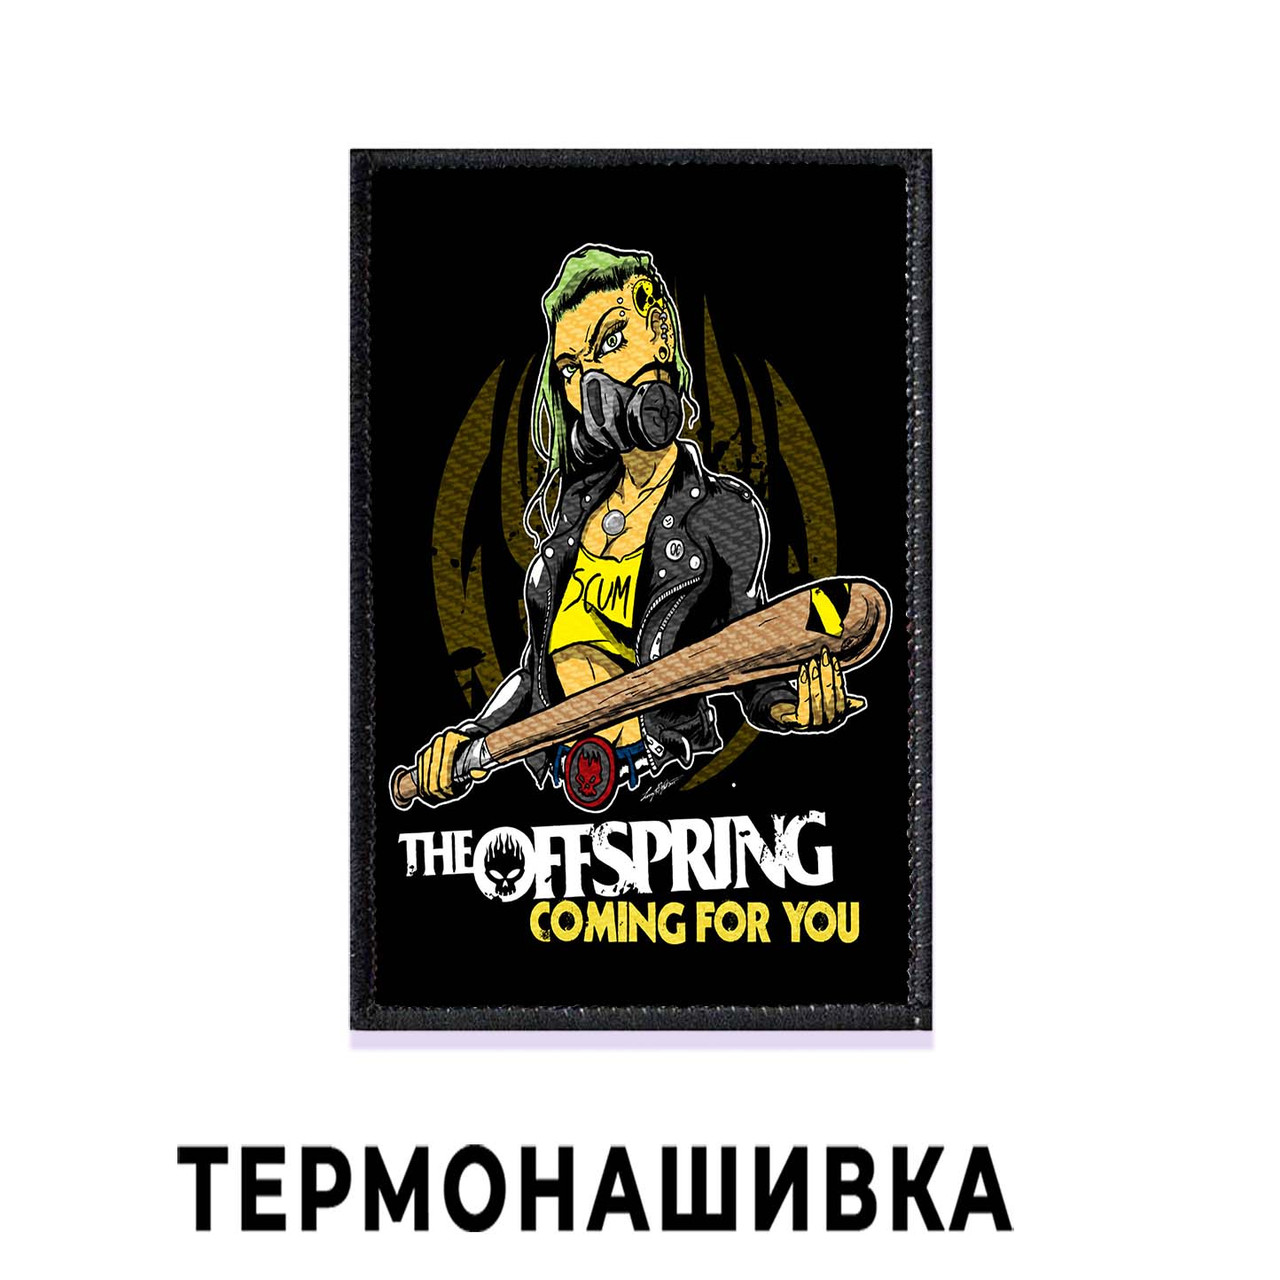 Нашивка The Offspring "Coming for you" / Офспрінг